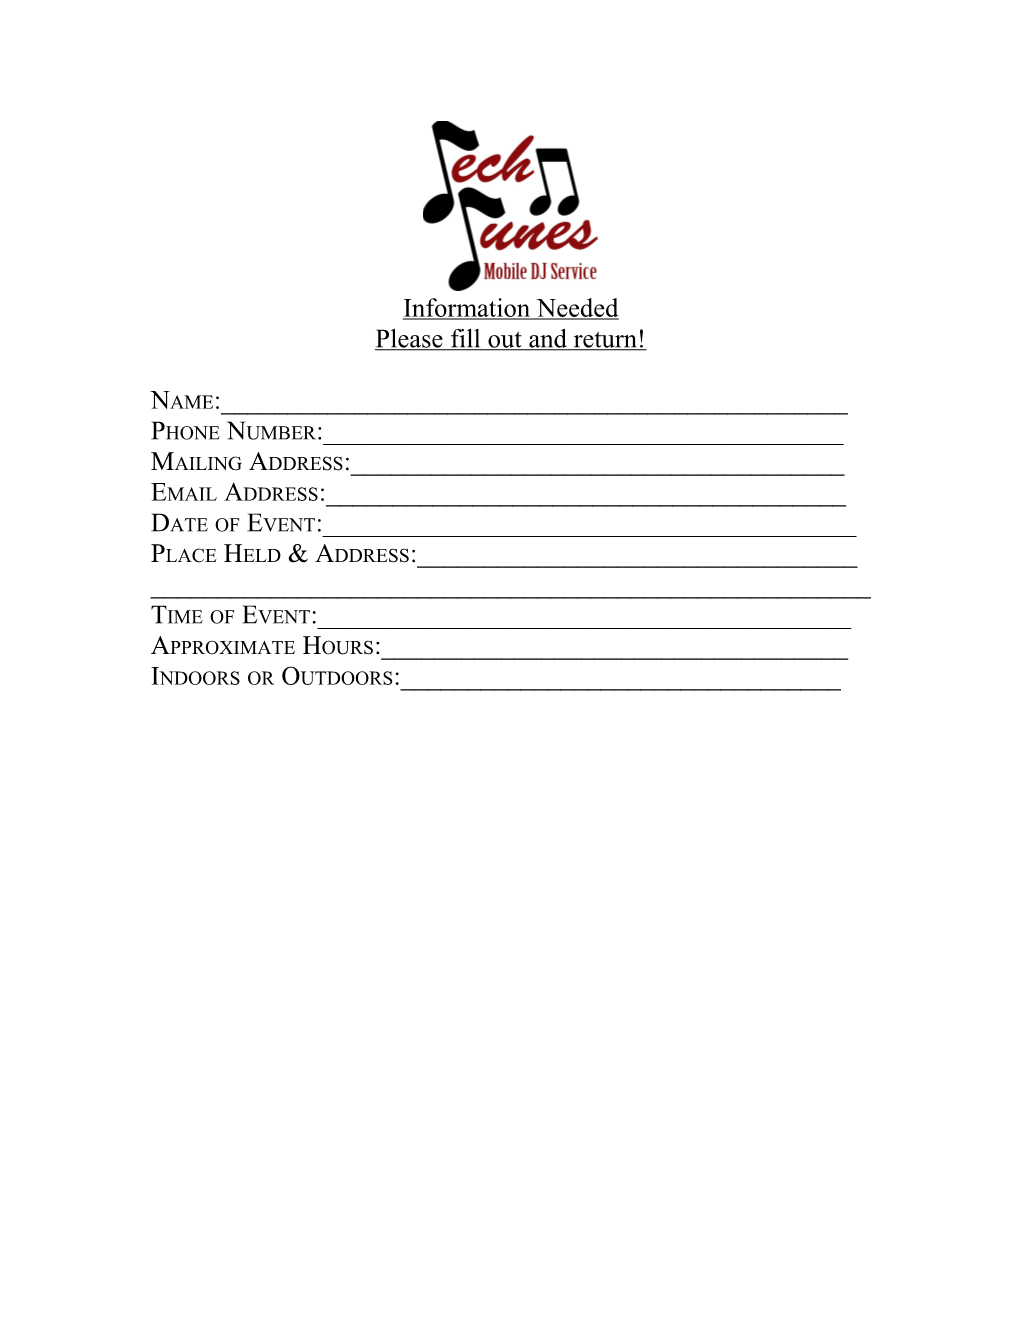 Please Fill out and Return!